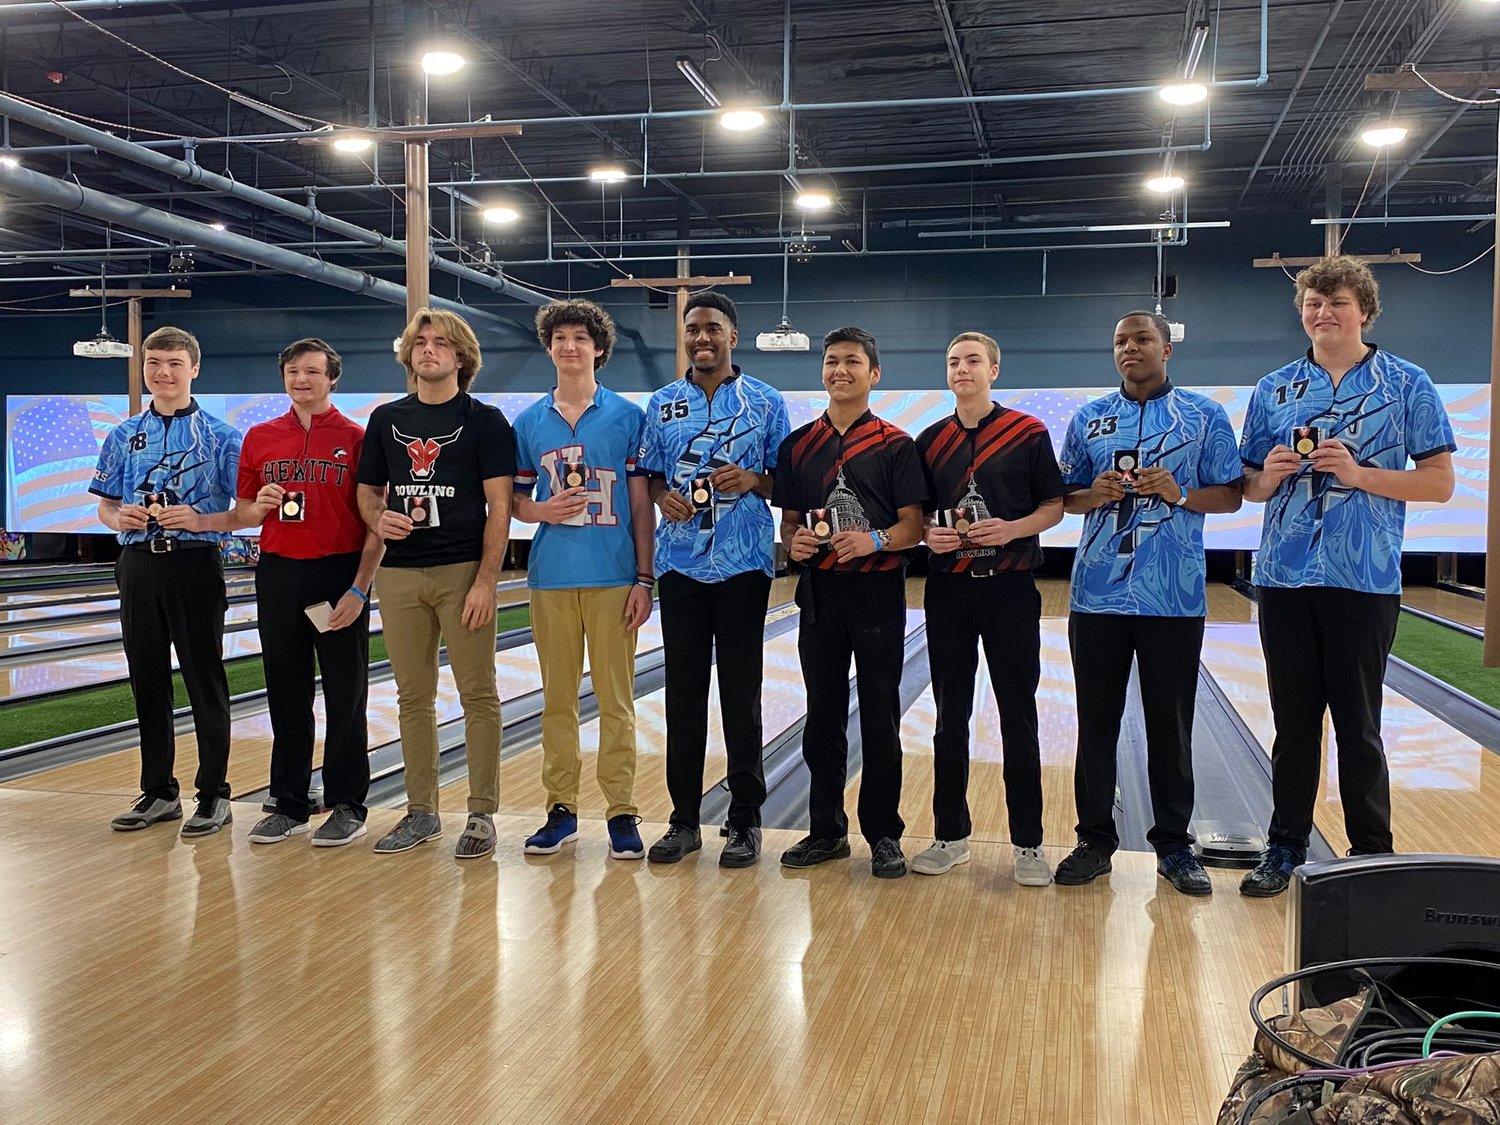 Anthony Passarelli, third from left, brought an individual medal back to Spanish Fort after his seventh-place finish in the qualifying round of the AHSAA bowling state championship Thursday, Jan. 26, in Gadsden.